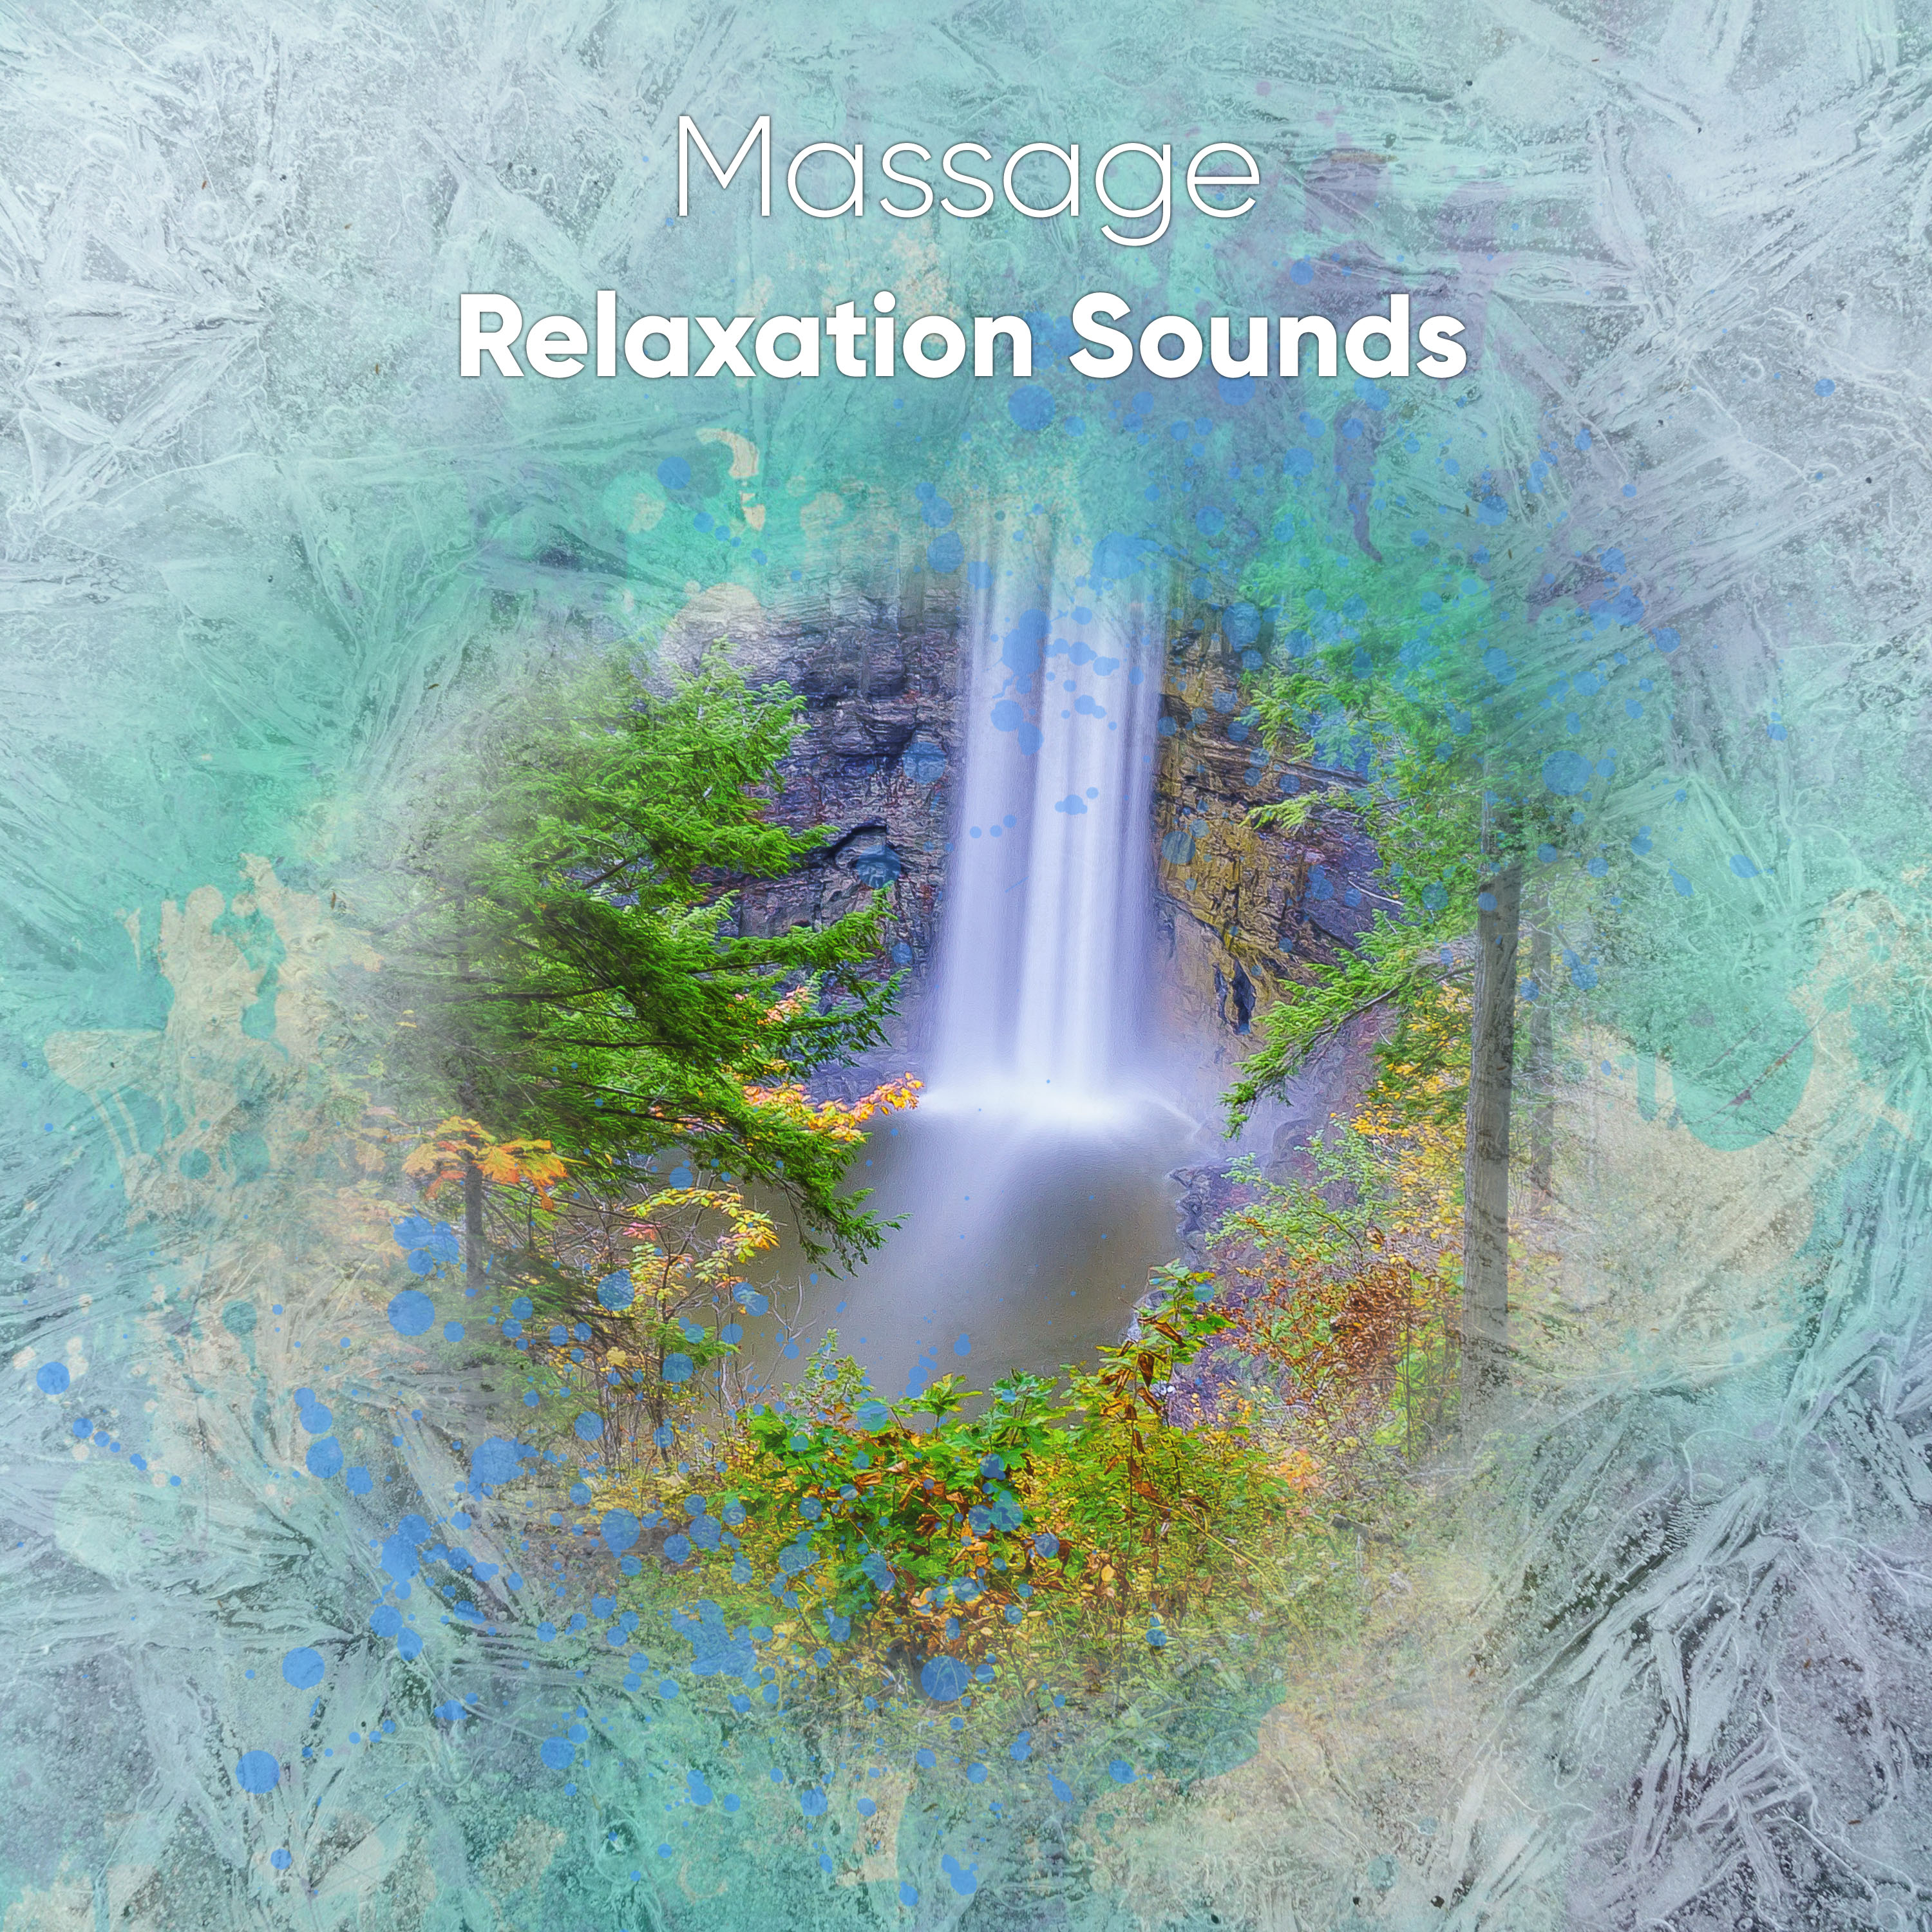 13 Massage Relaxation Sounds